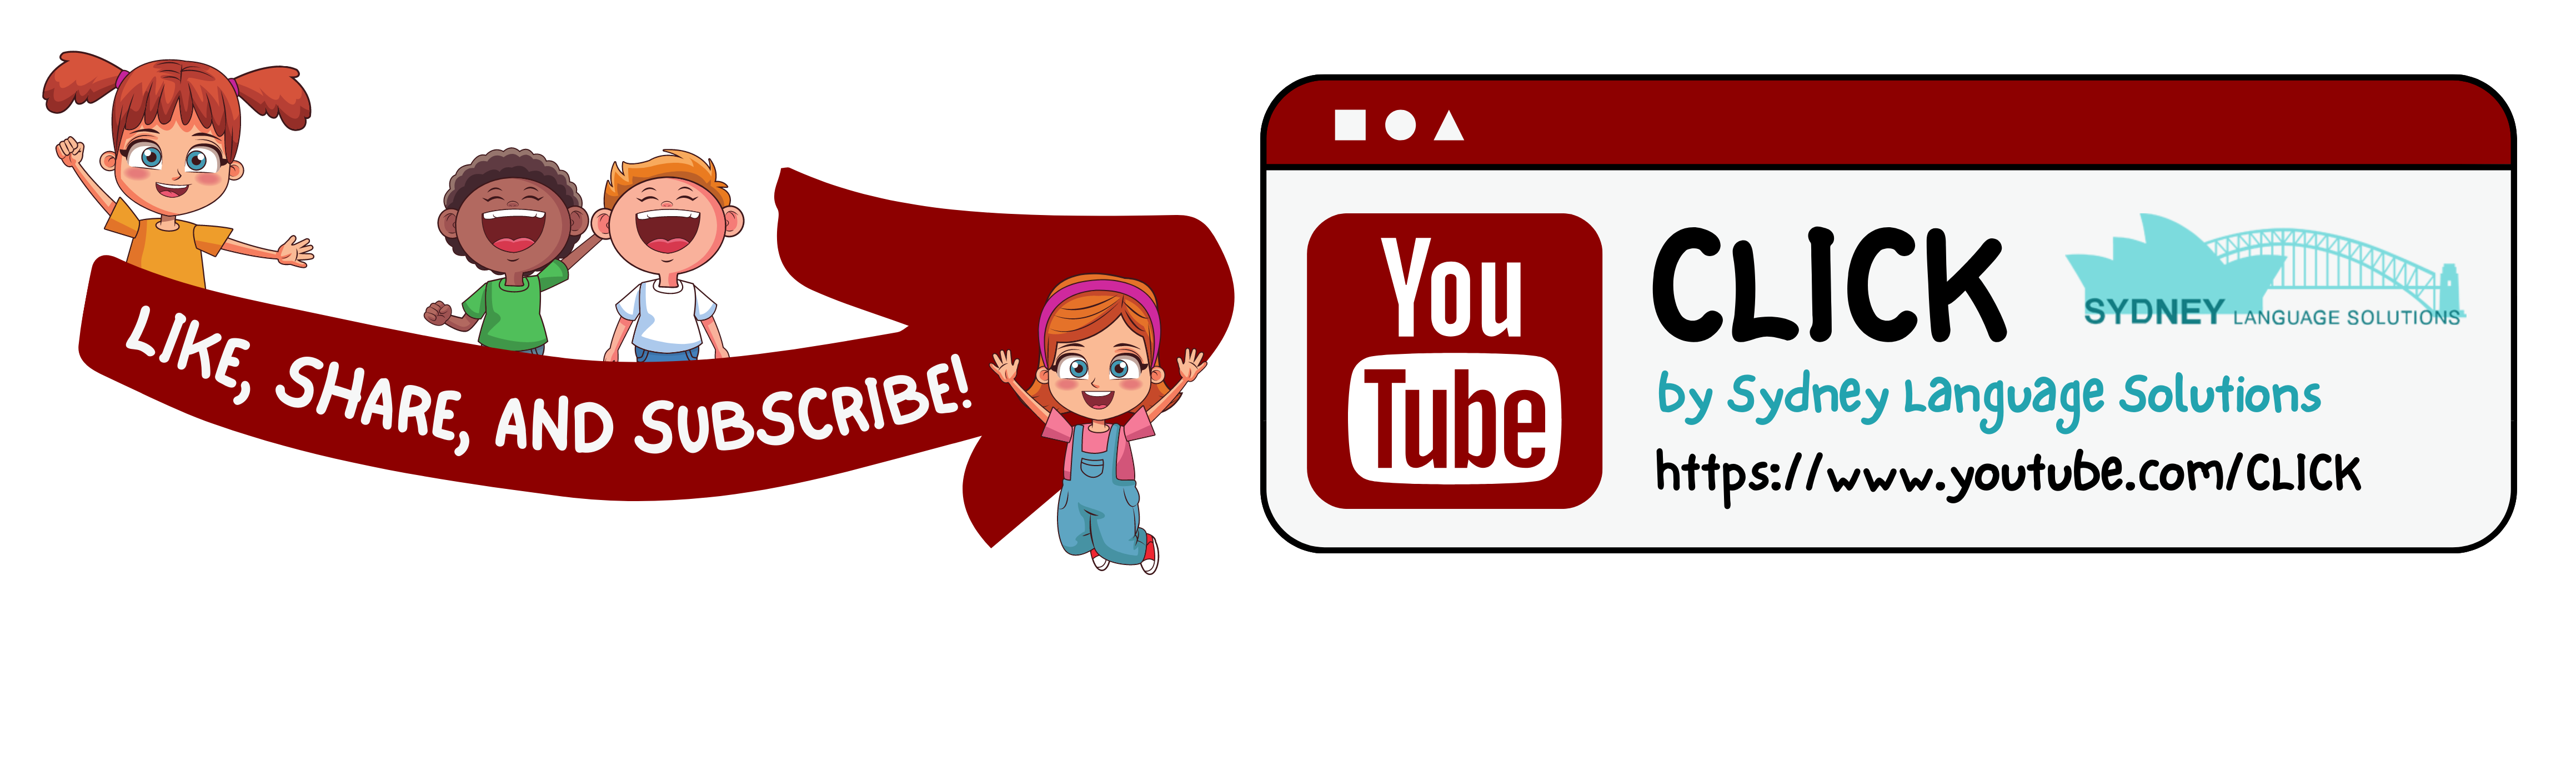 Online language class for Kids youtube link